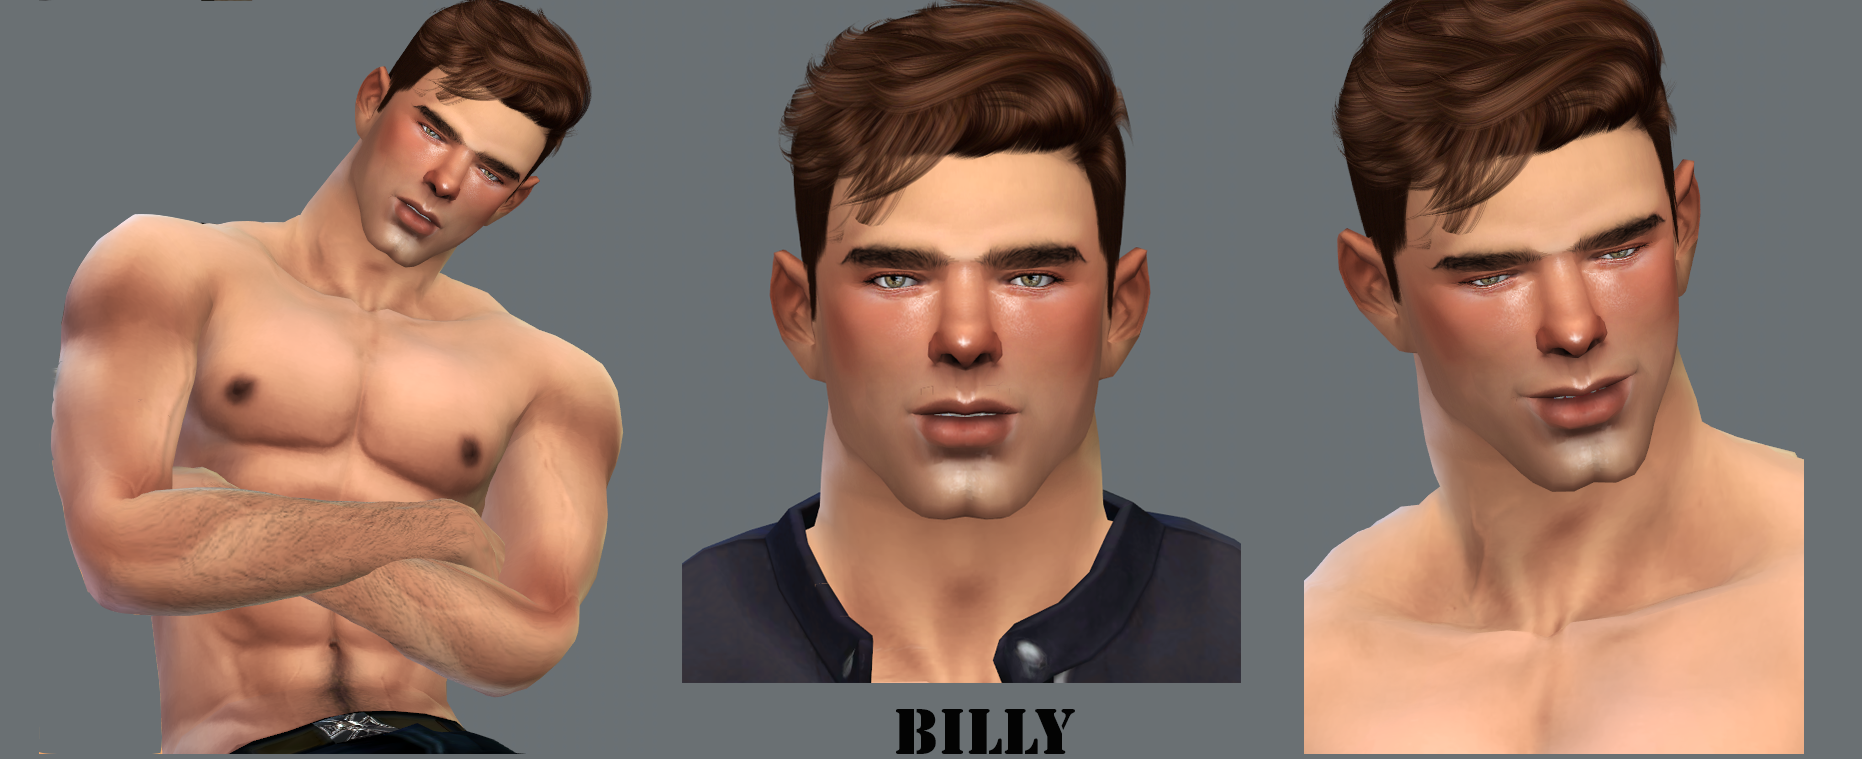 Billy1.png.5cd61c9991dc42cbc155145e4cce588e.png